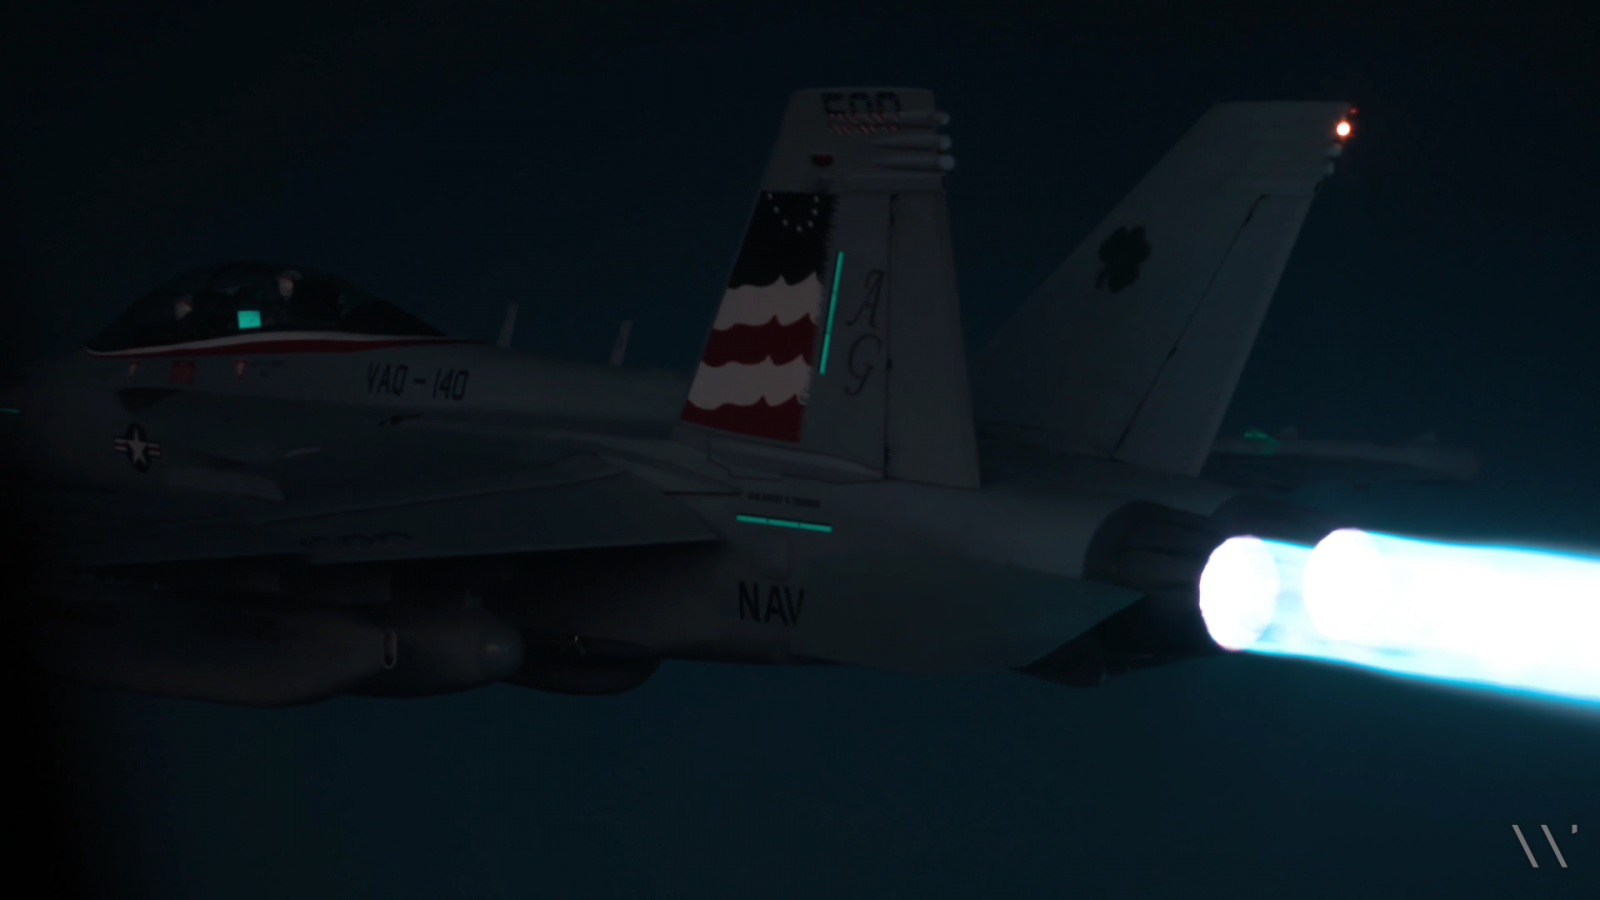 Wallpaper, afterburner, USN VAQ 140 504 Patriots, United States Navy, night, USS Harry S Truman, EA 18G, 7TH Carrier Air Wing, jet fighter, Multirole fighter, military 1920x1080